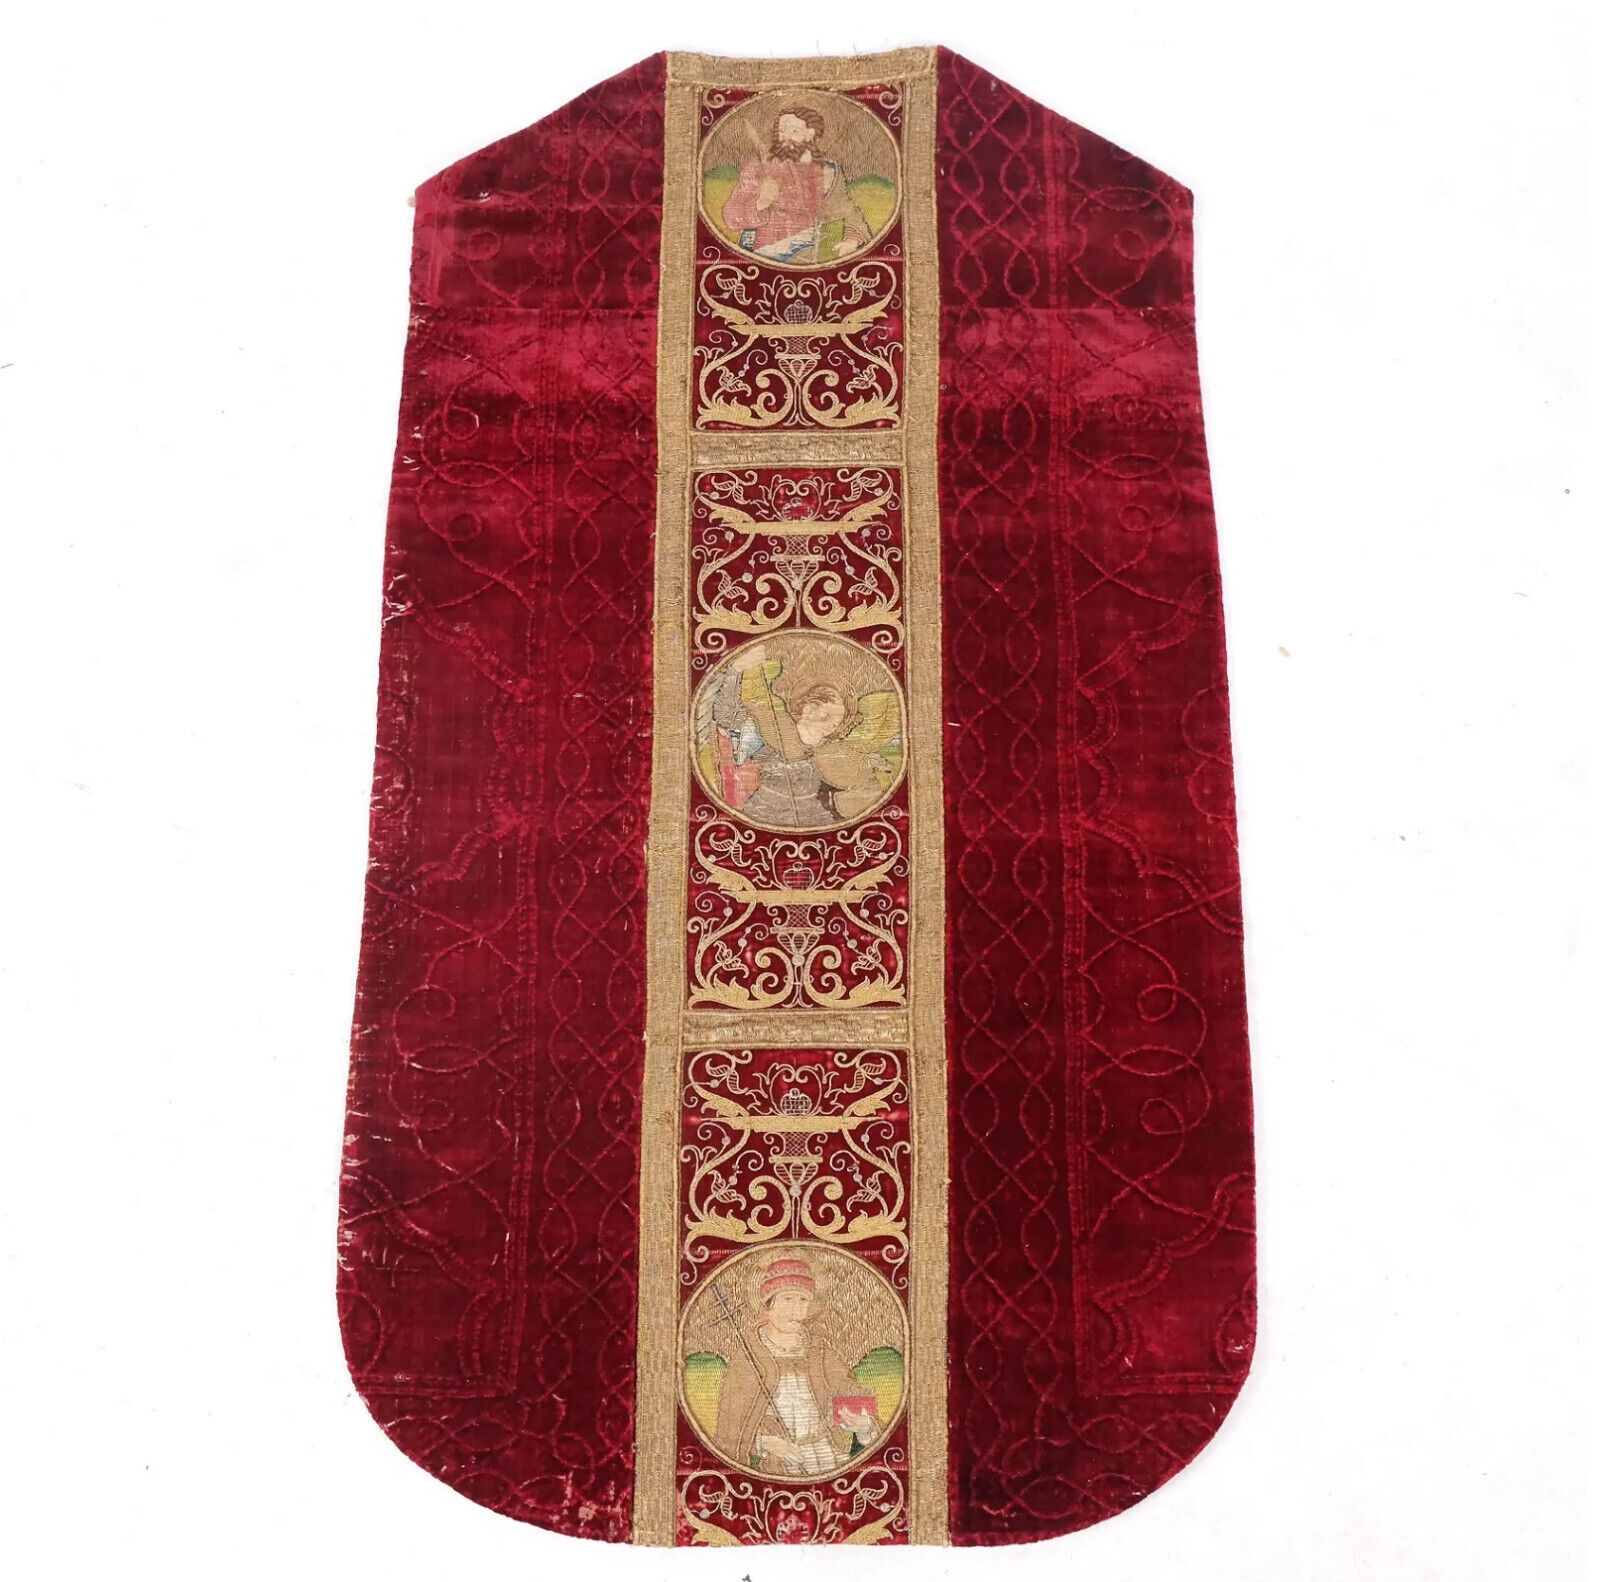 Antique Hand Embroidered Silk and Velvet 16th or 17th Century Chasuble